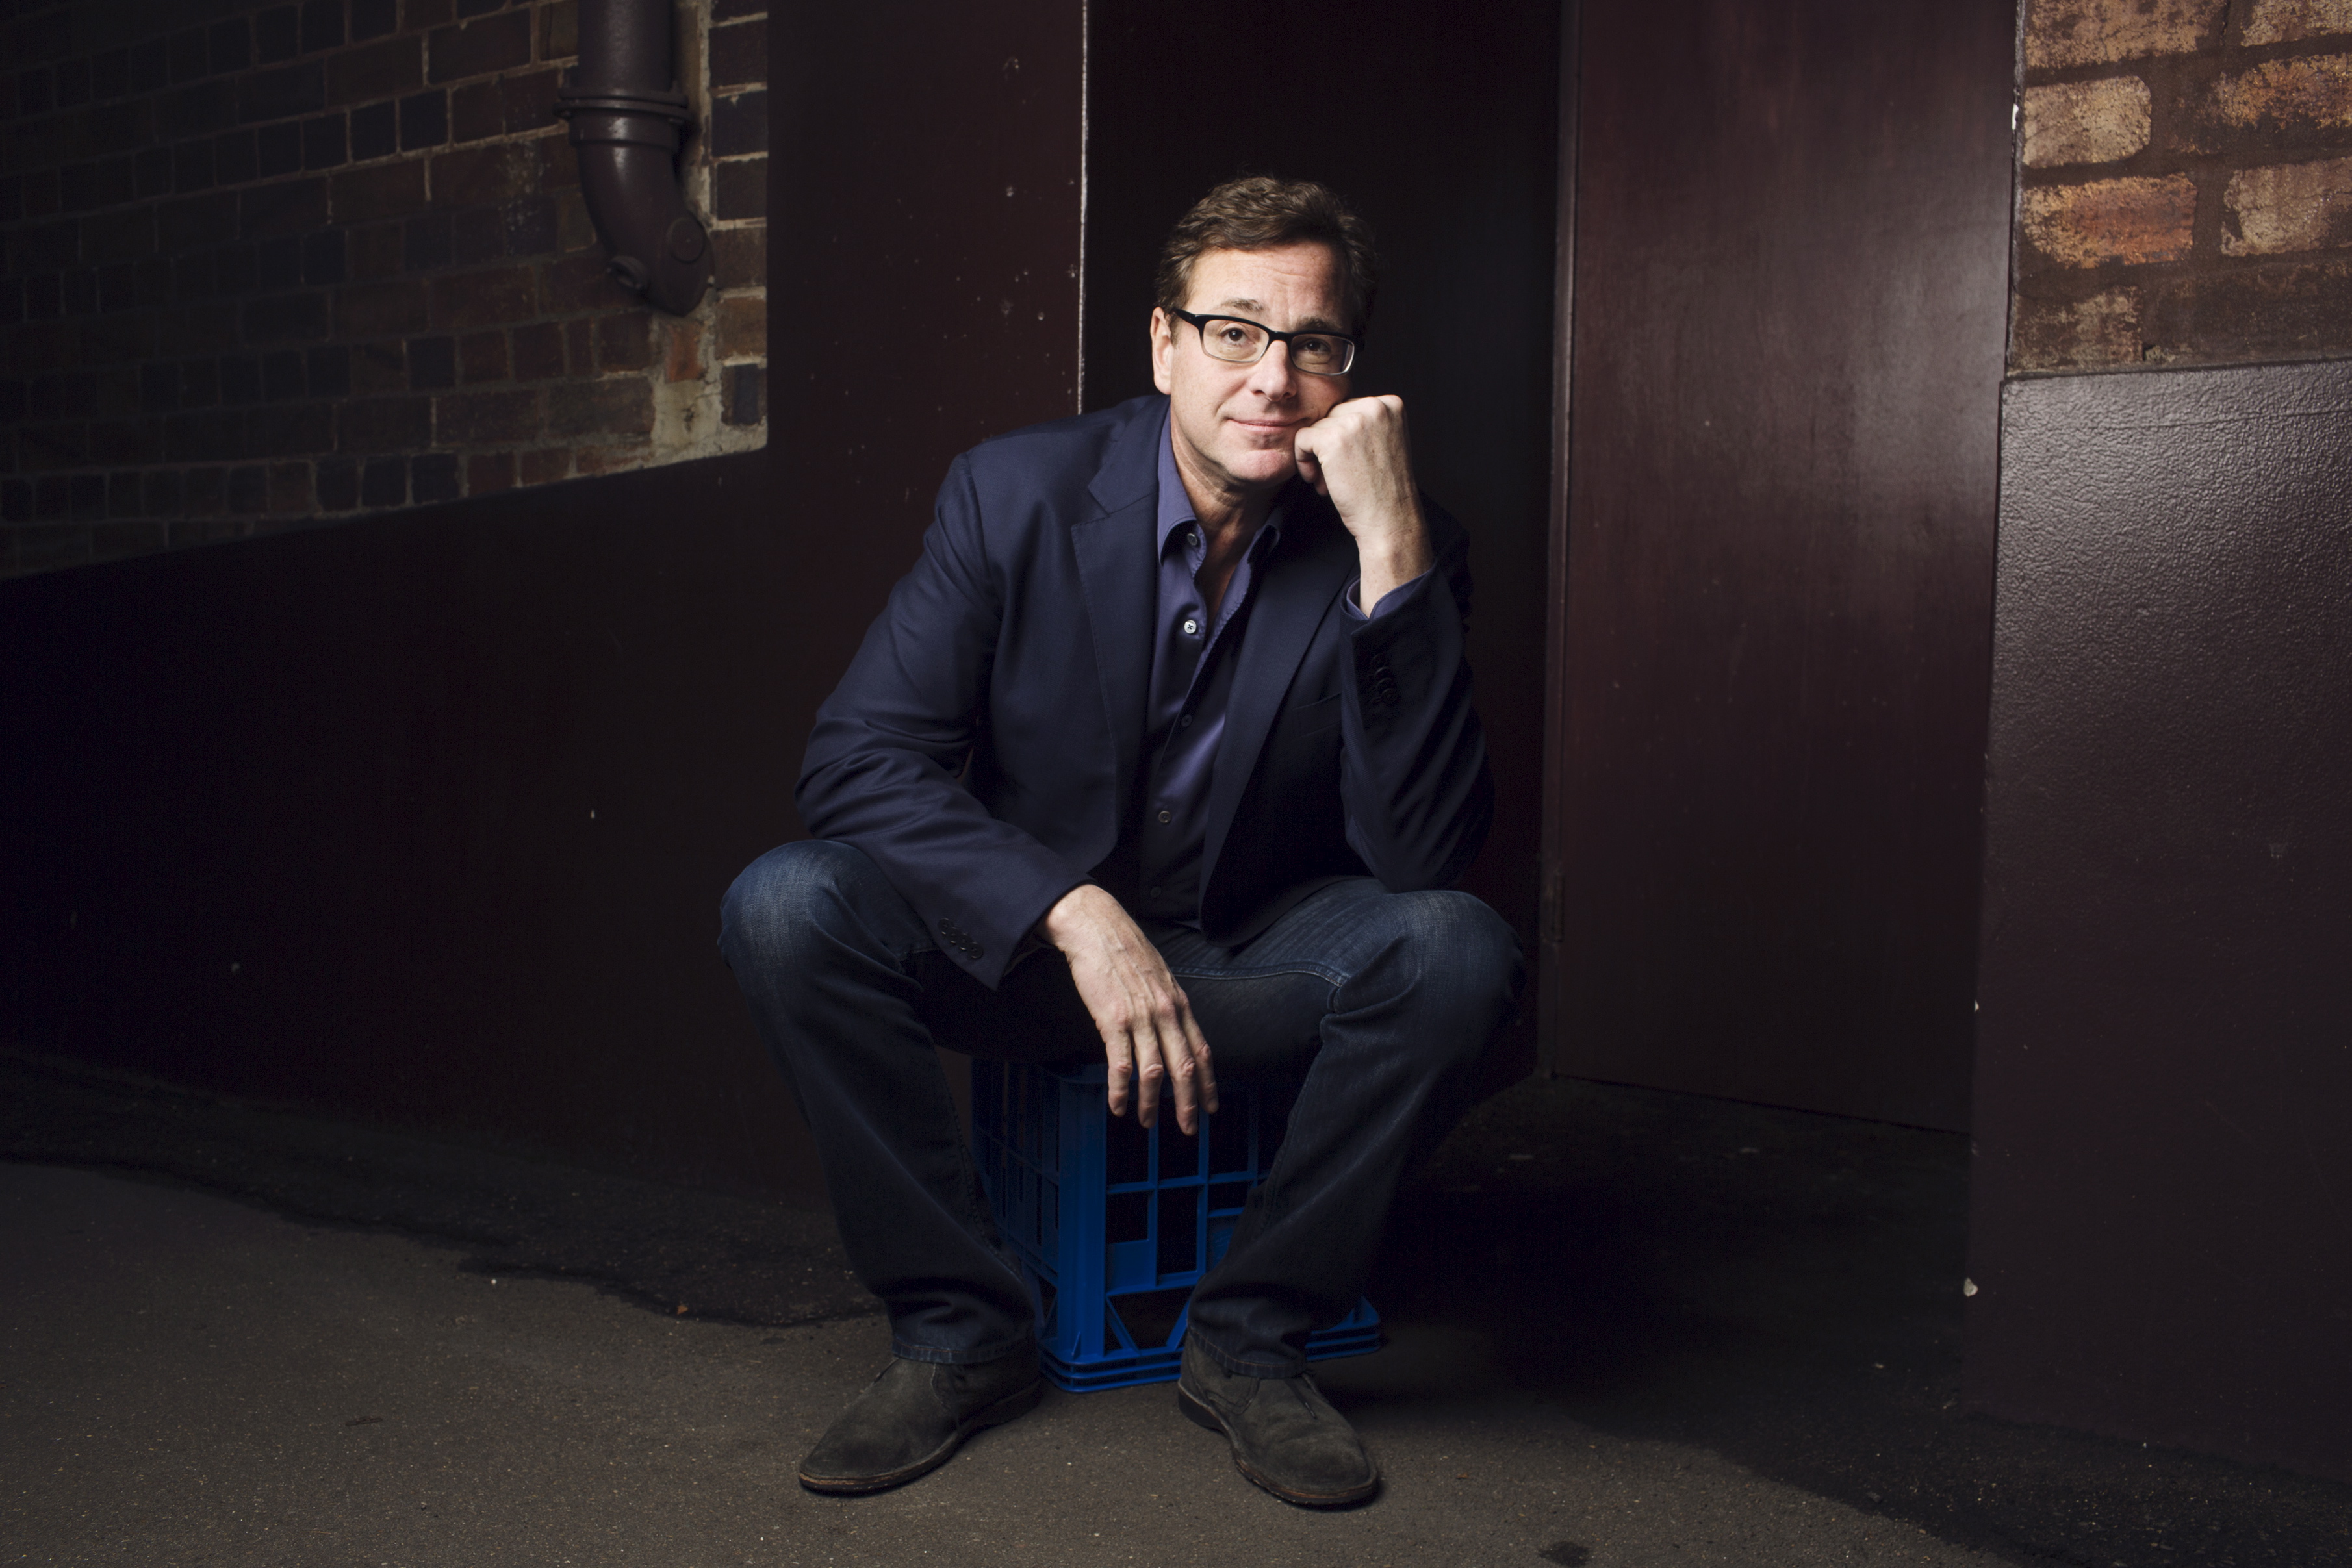 Bob Saget sits down with his hand under his chin in front of a dark background. 